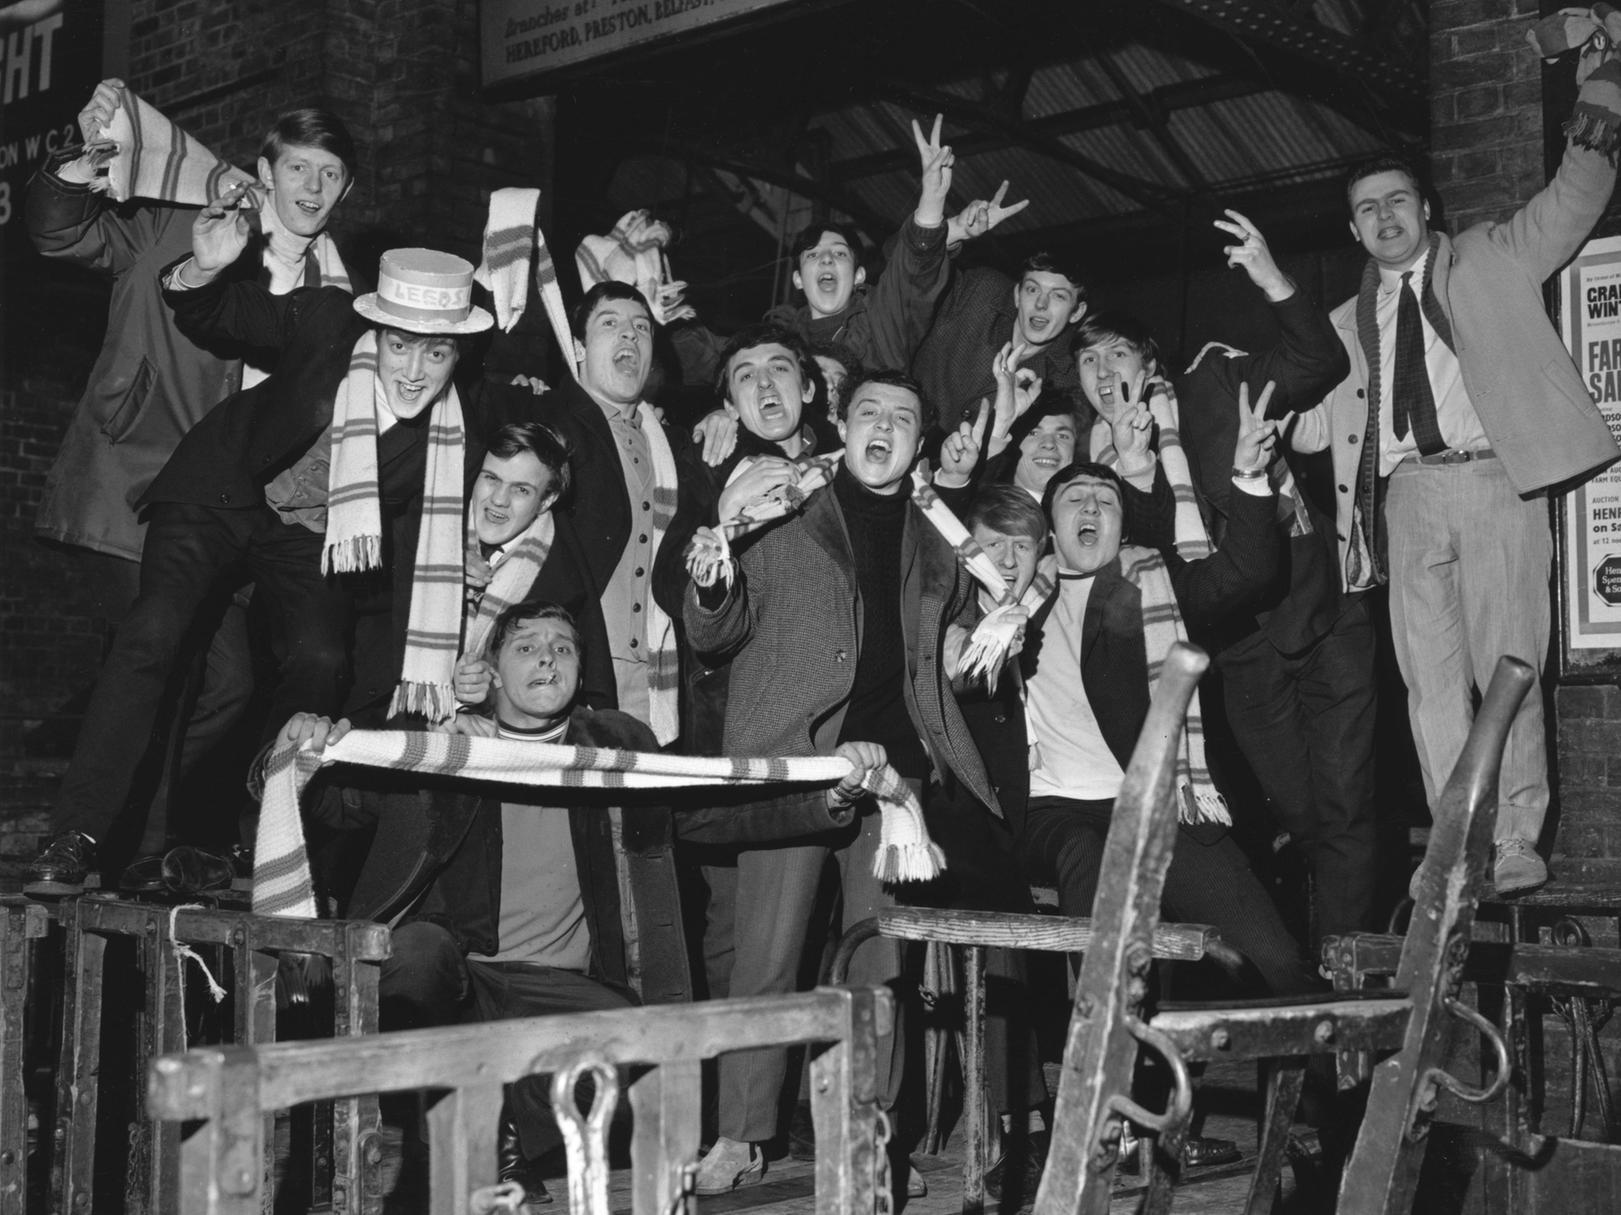 Leeds United football supporters waiting for a train